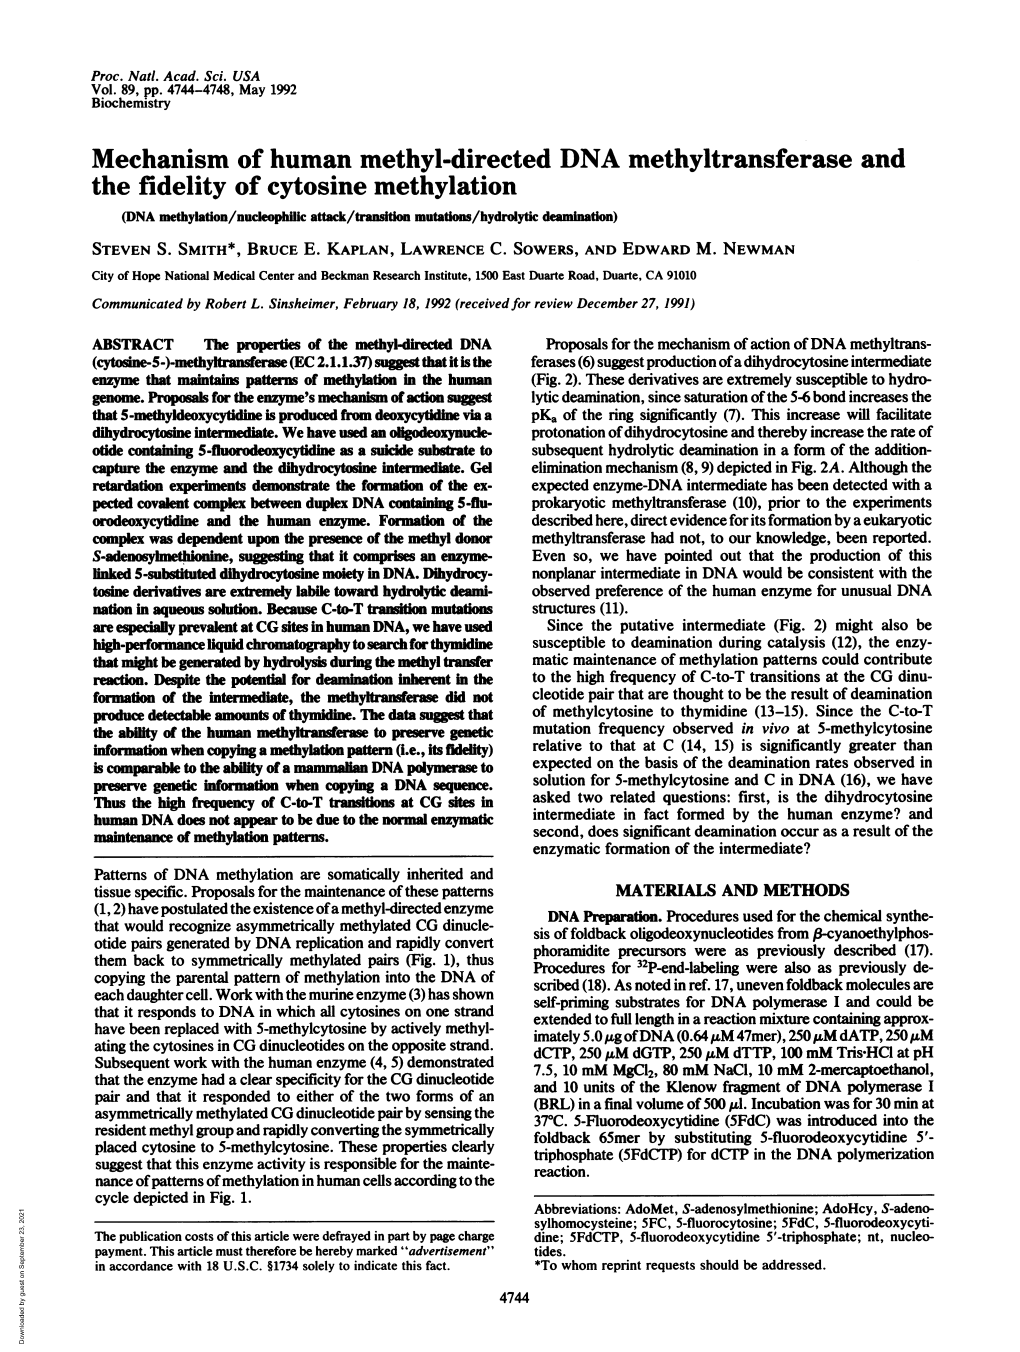 Mechanism of Human Methyl-Directed DNA Methyltransferase and The